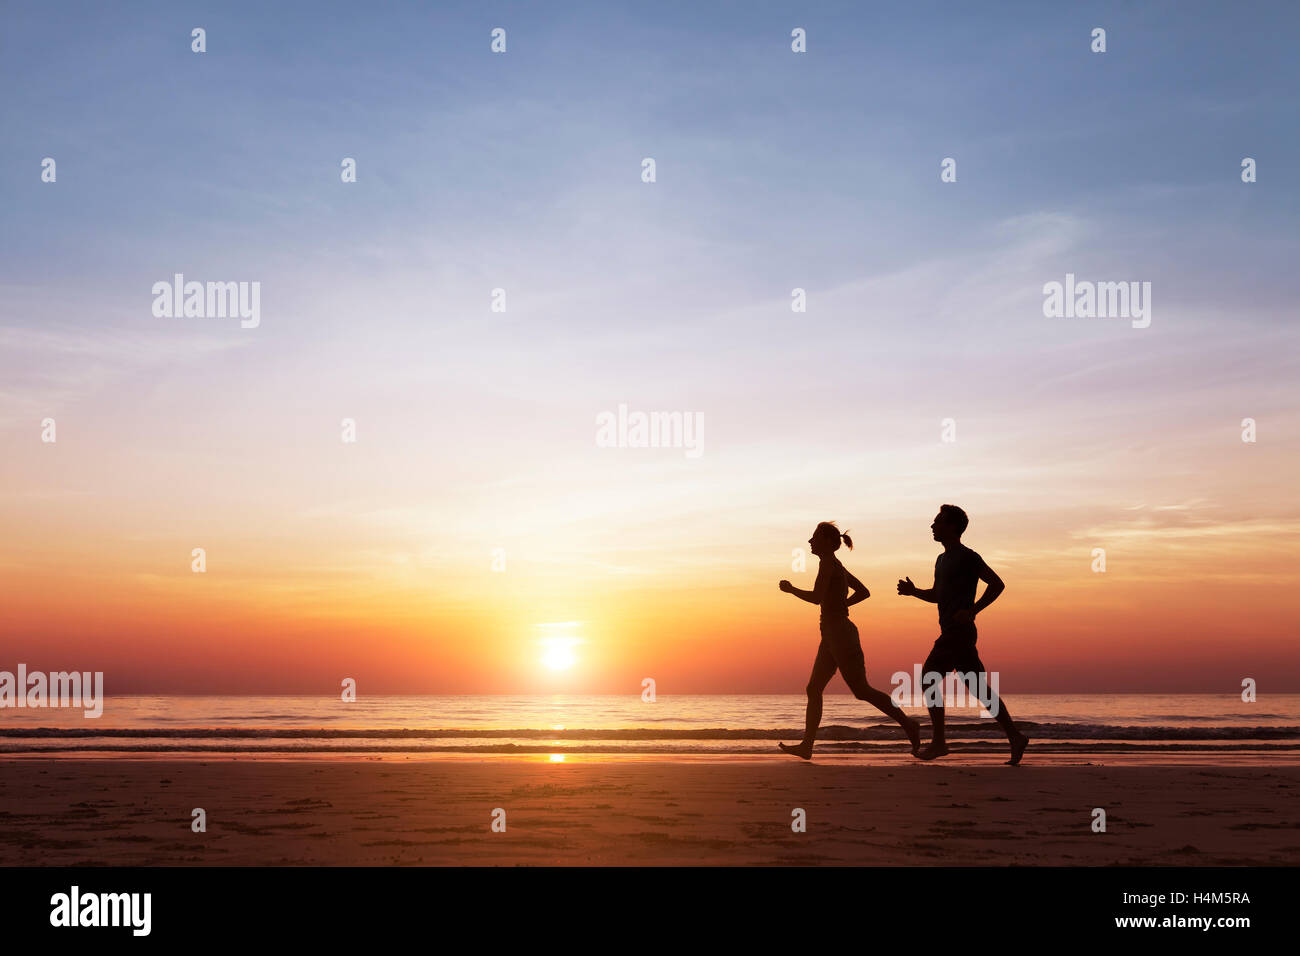 Silhouette of two sportive runners running on the beach at sunset, concept about healthy lifestyle and wellbeing Stock Photo